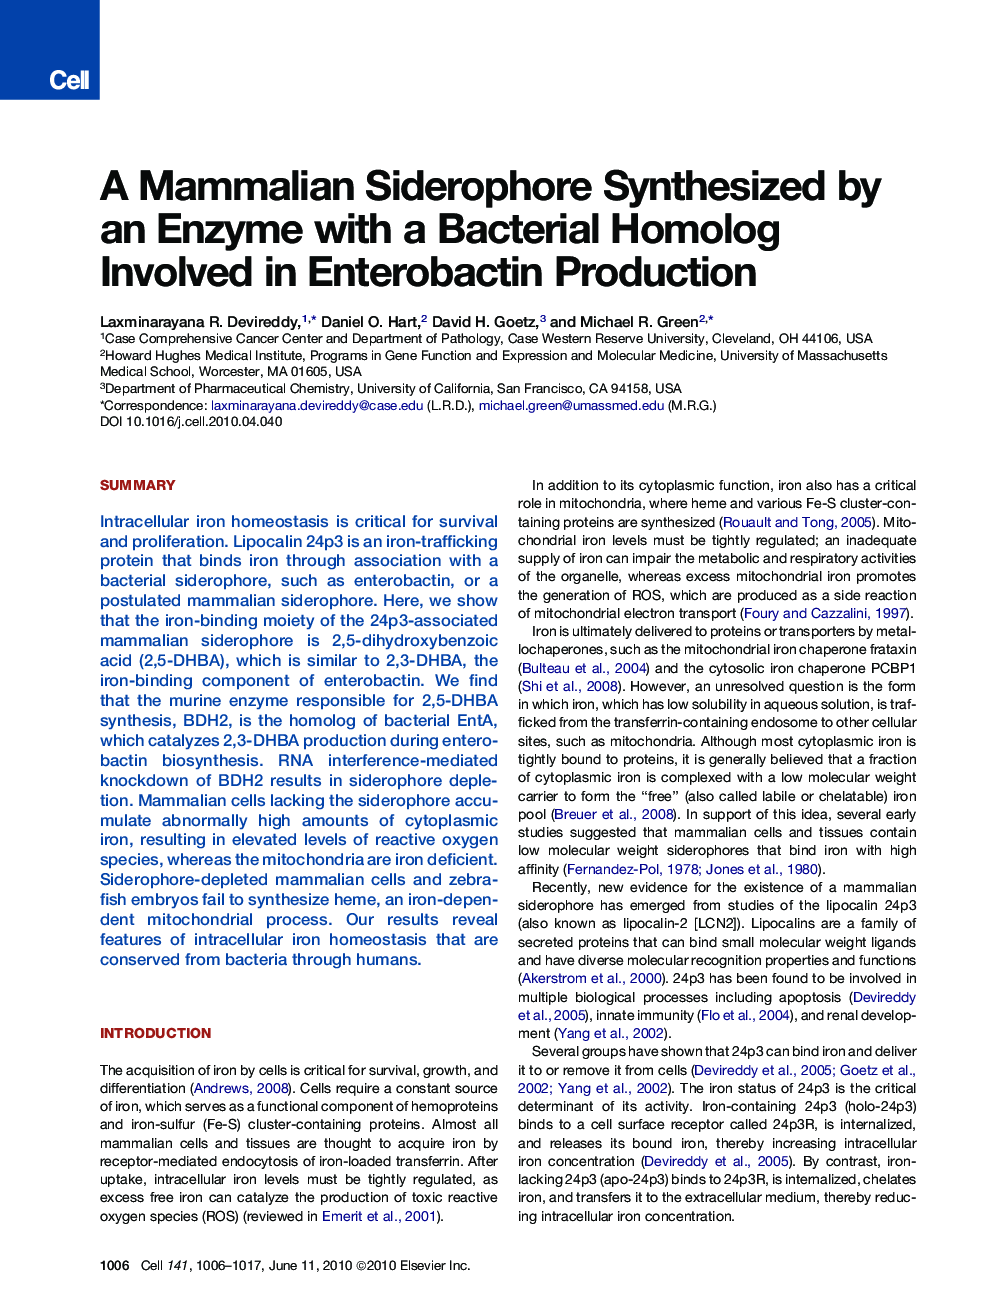 A Mammalian Siderophore Synthesized by an Enzyme with a Bacterial Homolog Involved in Enterobactin Production